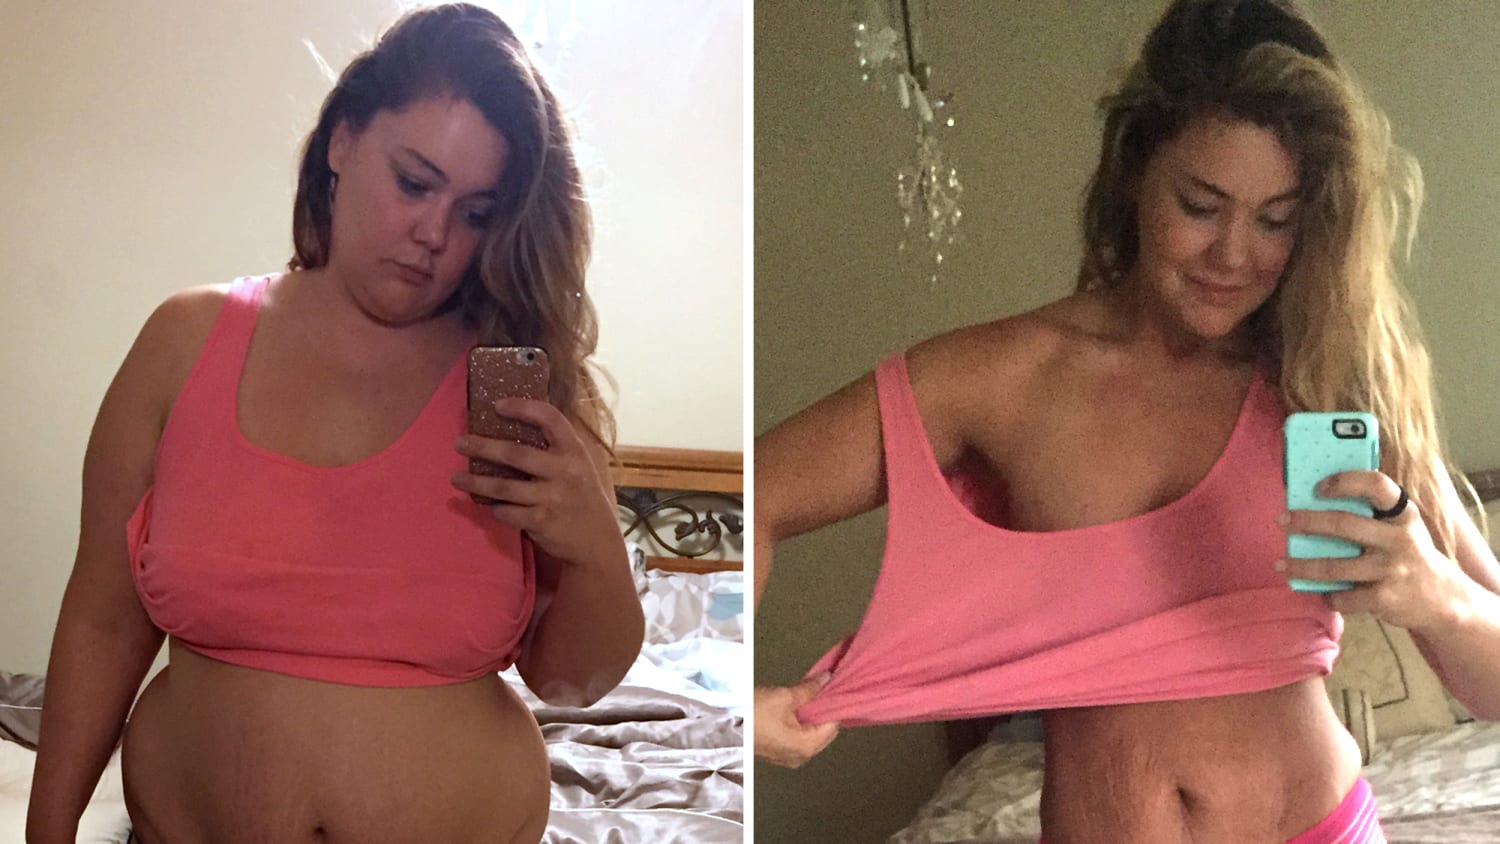 The habit that helped her lose 124 pounds, heal depression